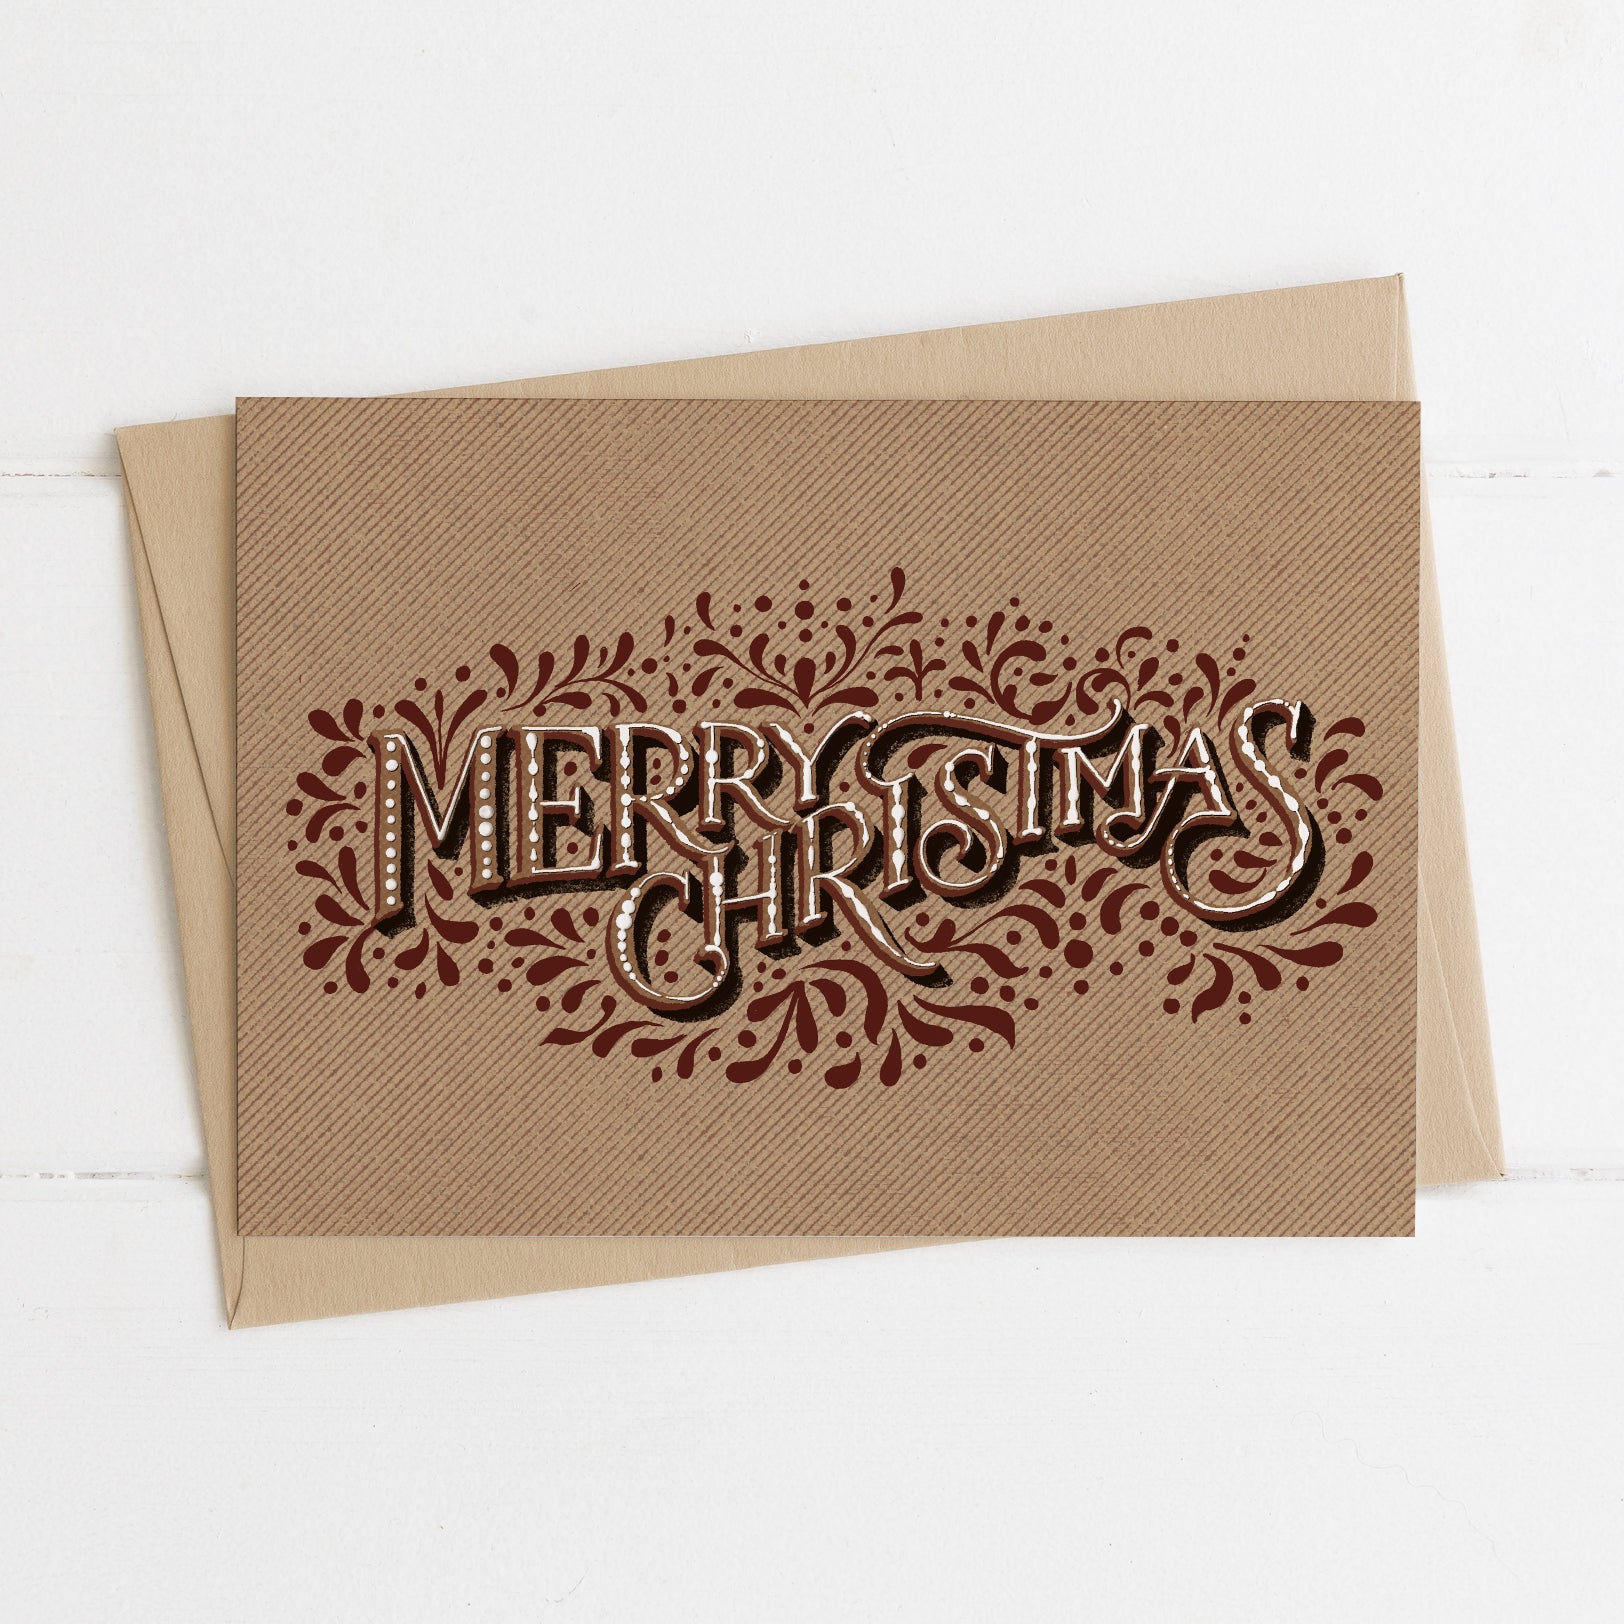 5 Christmas Cards - Gingerbread theme